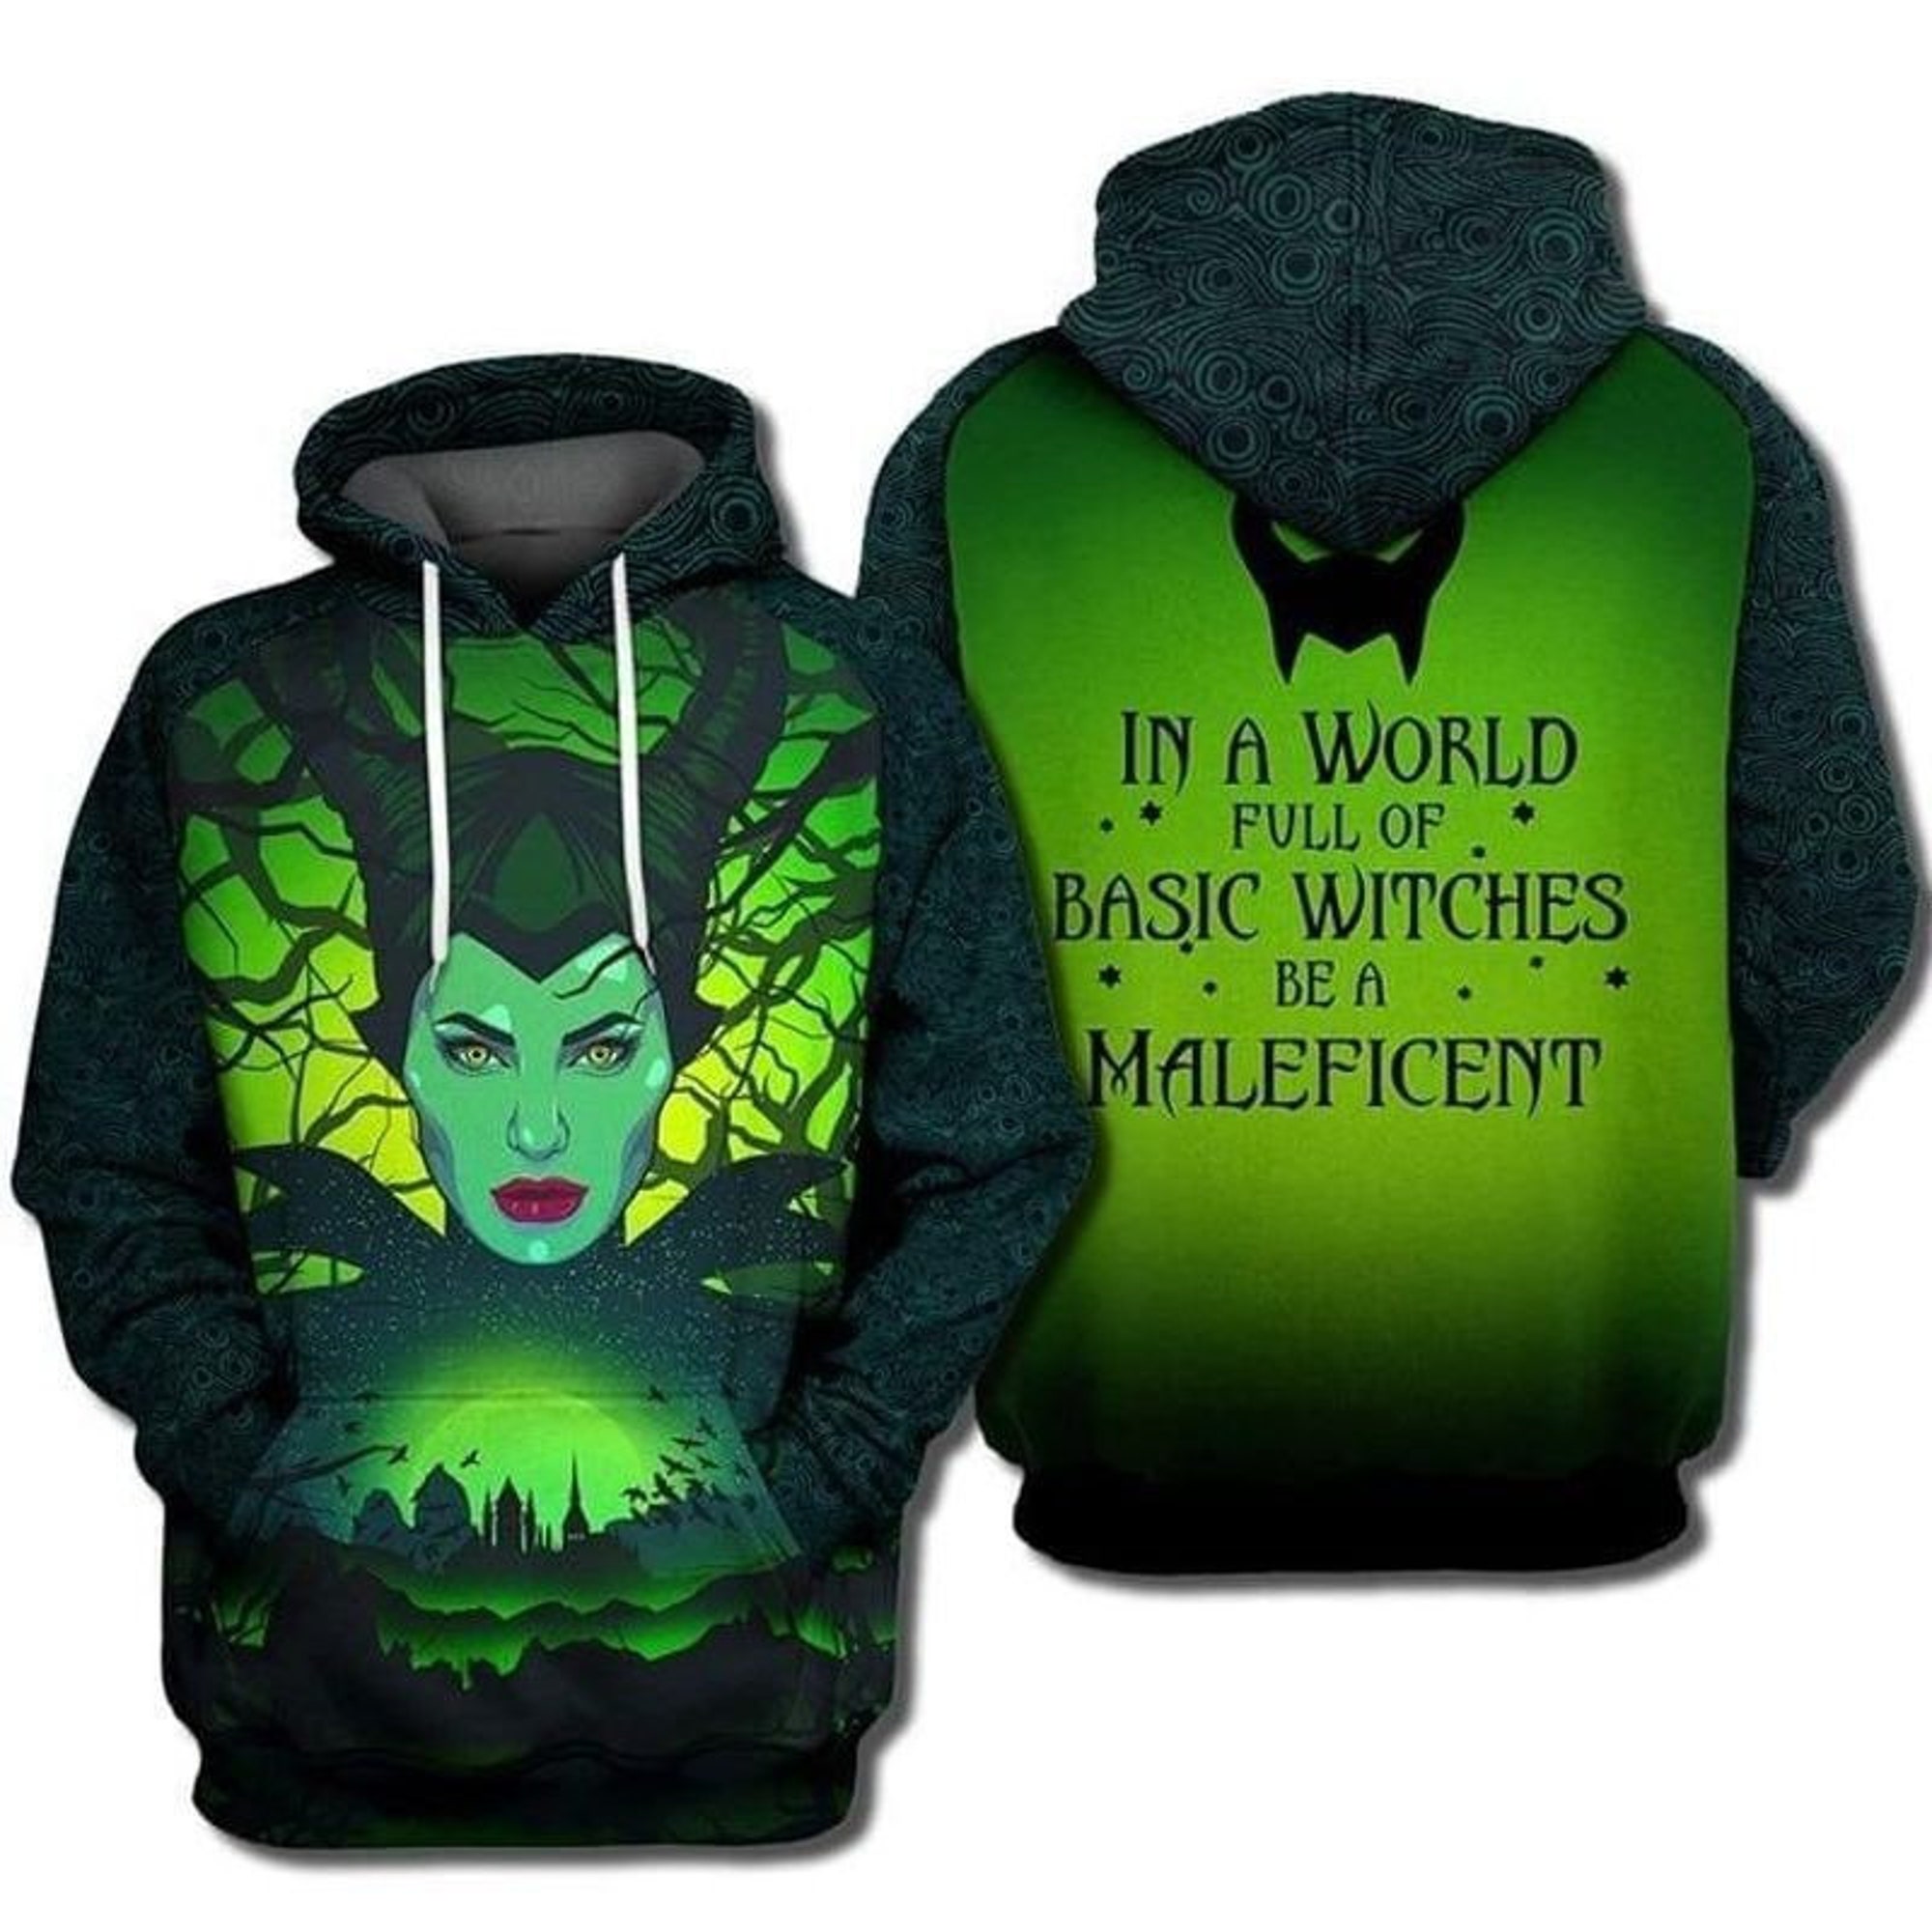 For Maleficent Lovers In World Full Of Basic Witches Be A Maleficent 3d shirt